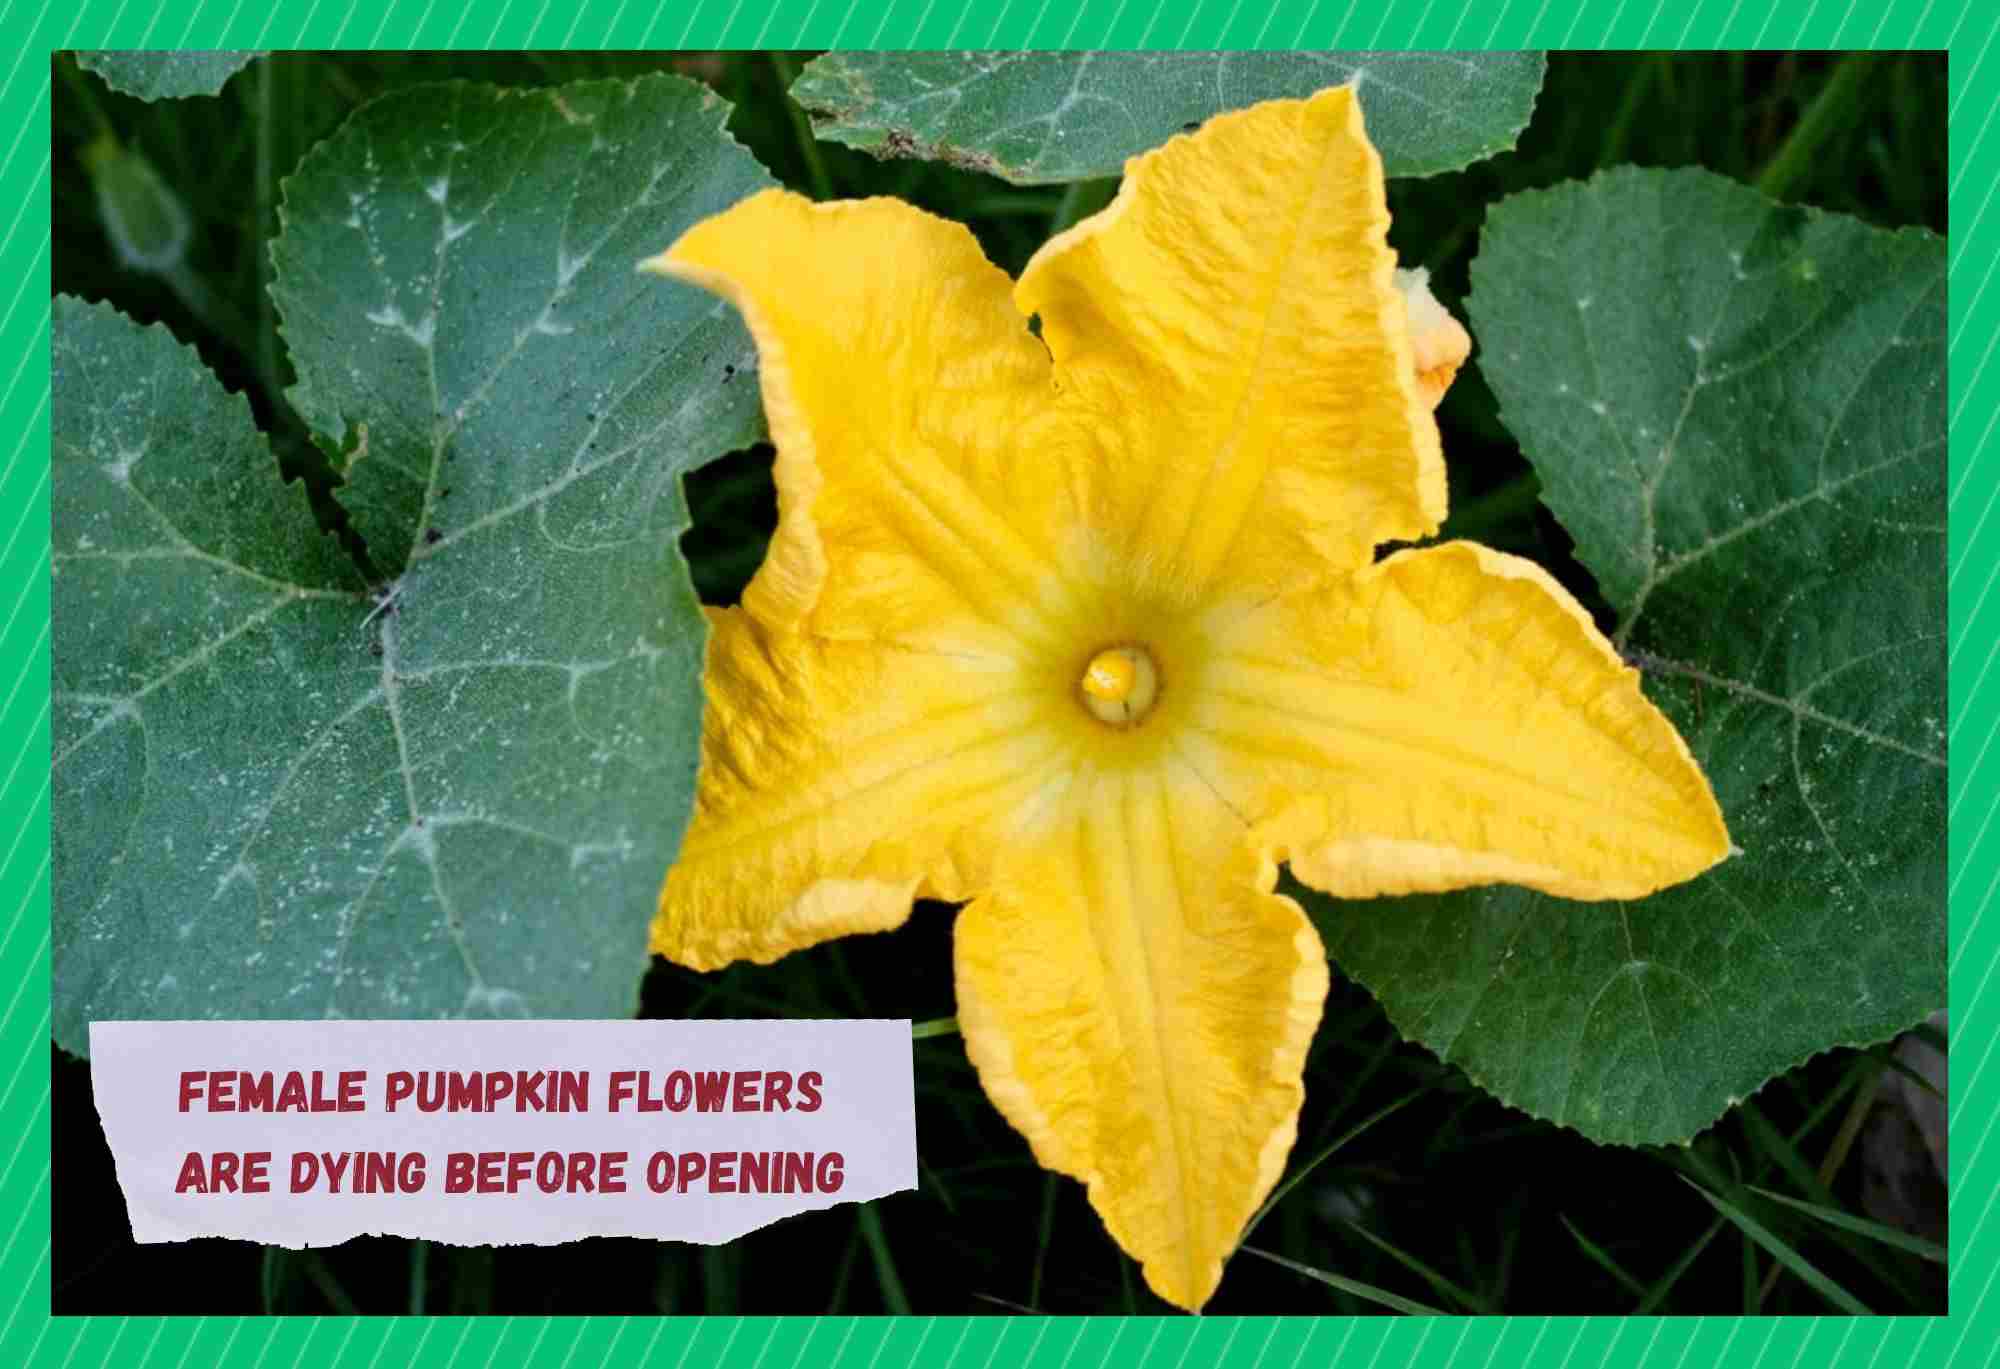 female pumpkin flowers dying before opening